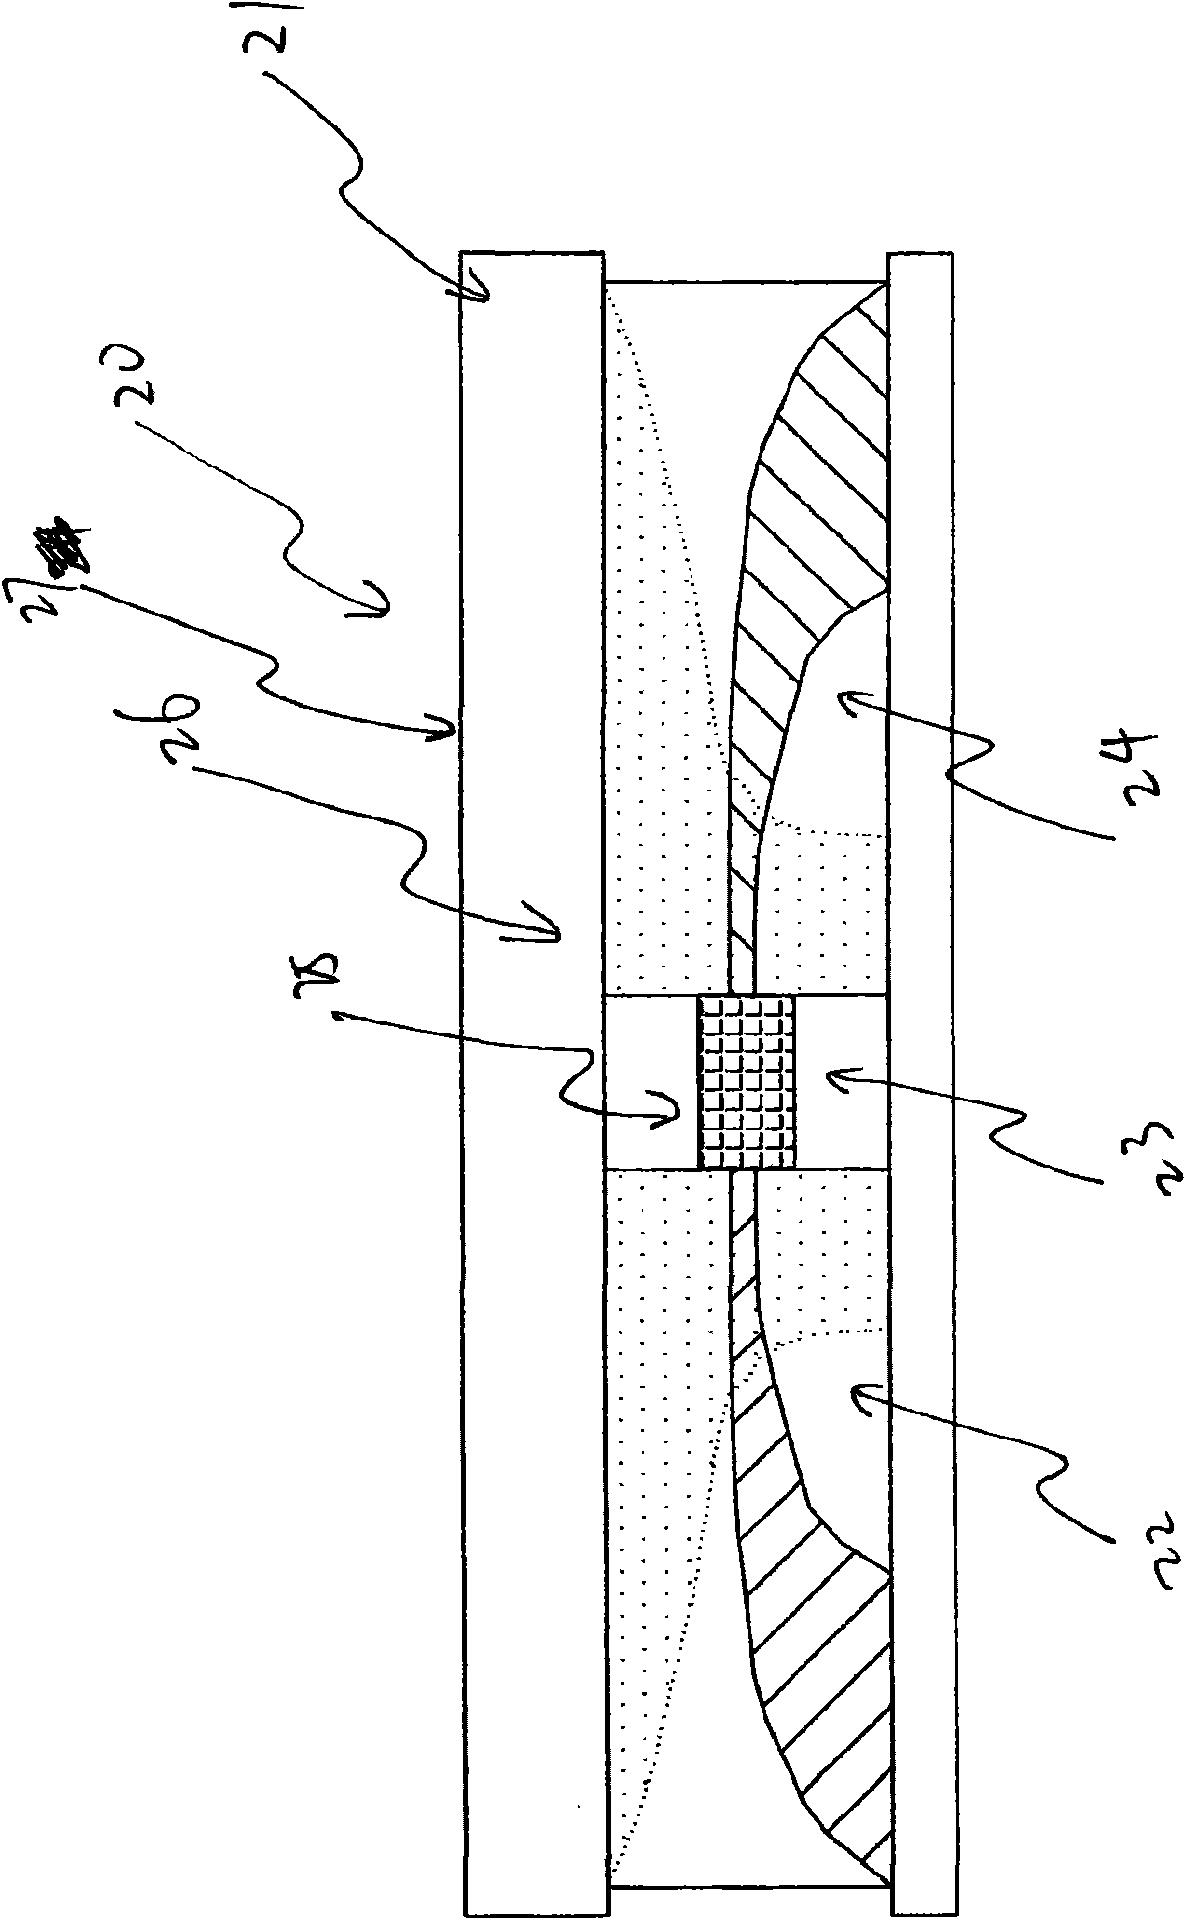 Integrated cooling system of high-power amplifier using waveguide space synthesis method